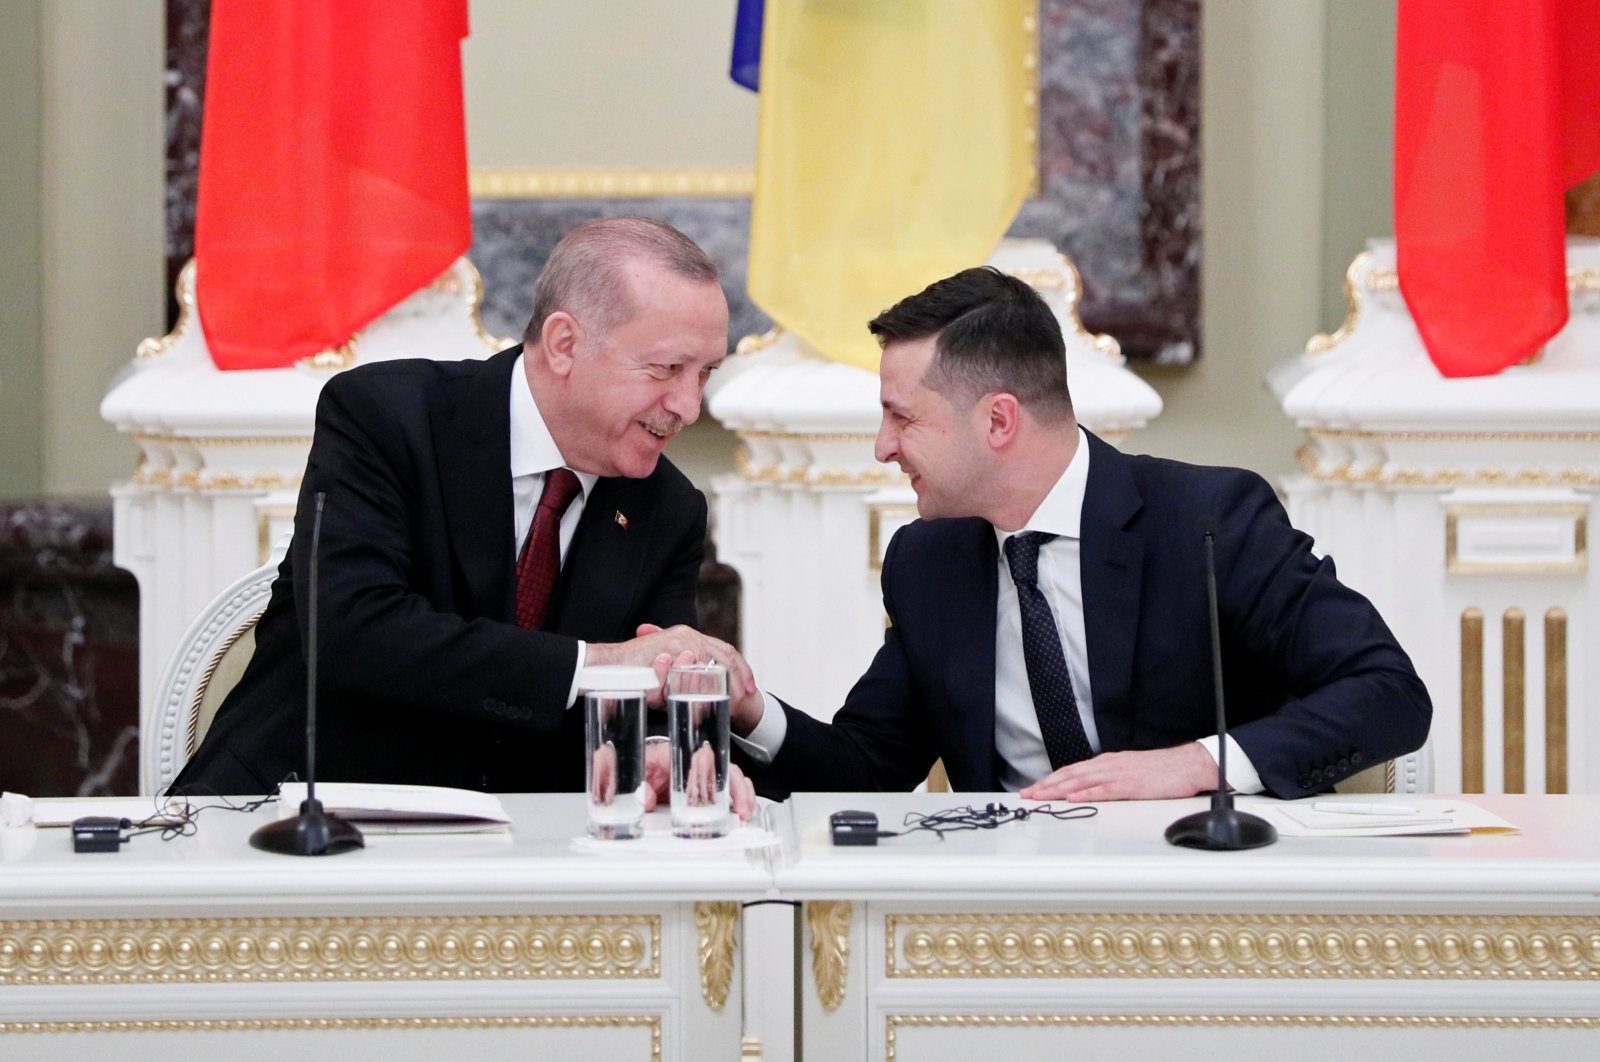 President Recep Tayyip Erdoğan and Ukrainian President Volodymyr Zelenskyy shake hands during a joint news conference following their meeting in Kyiv, Ukraine, Feb. 3, 2020. (Reuters Photo)